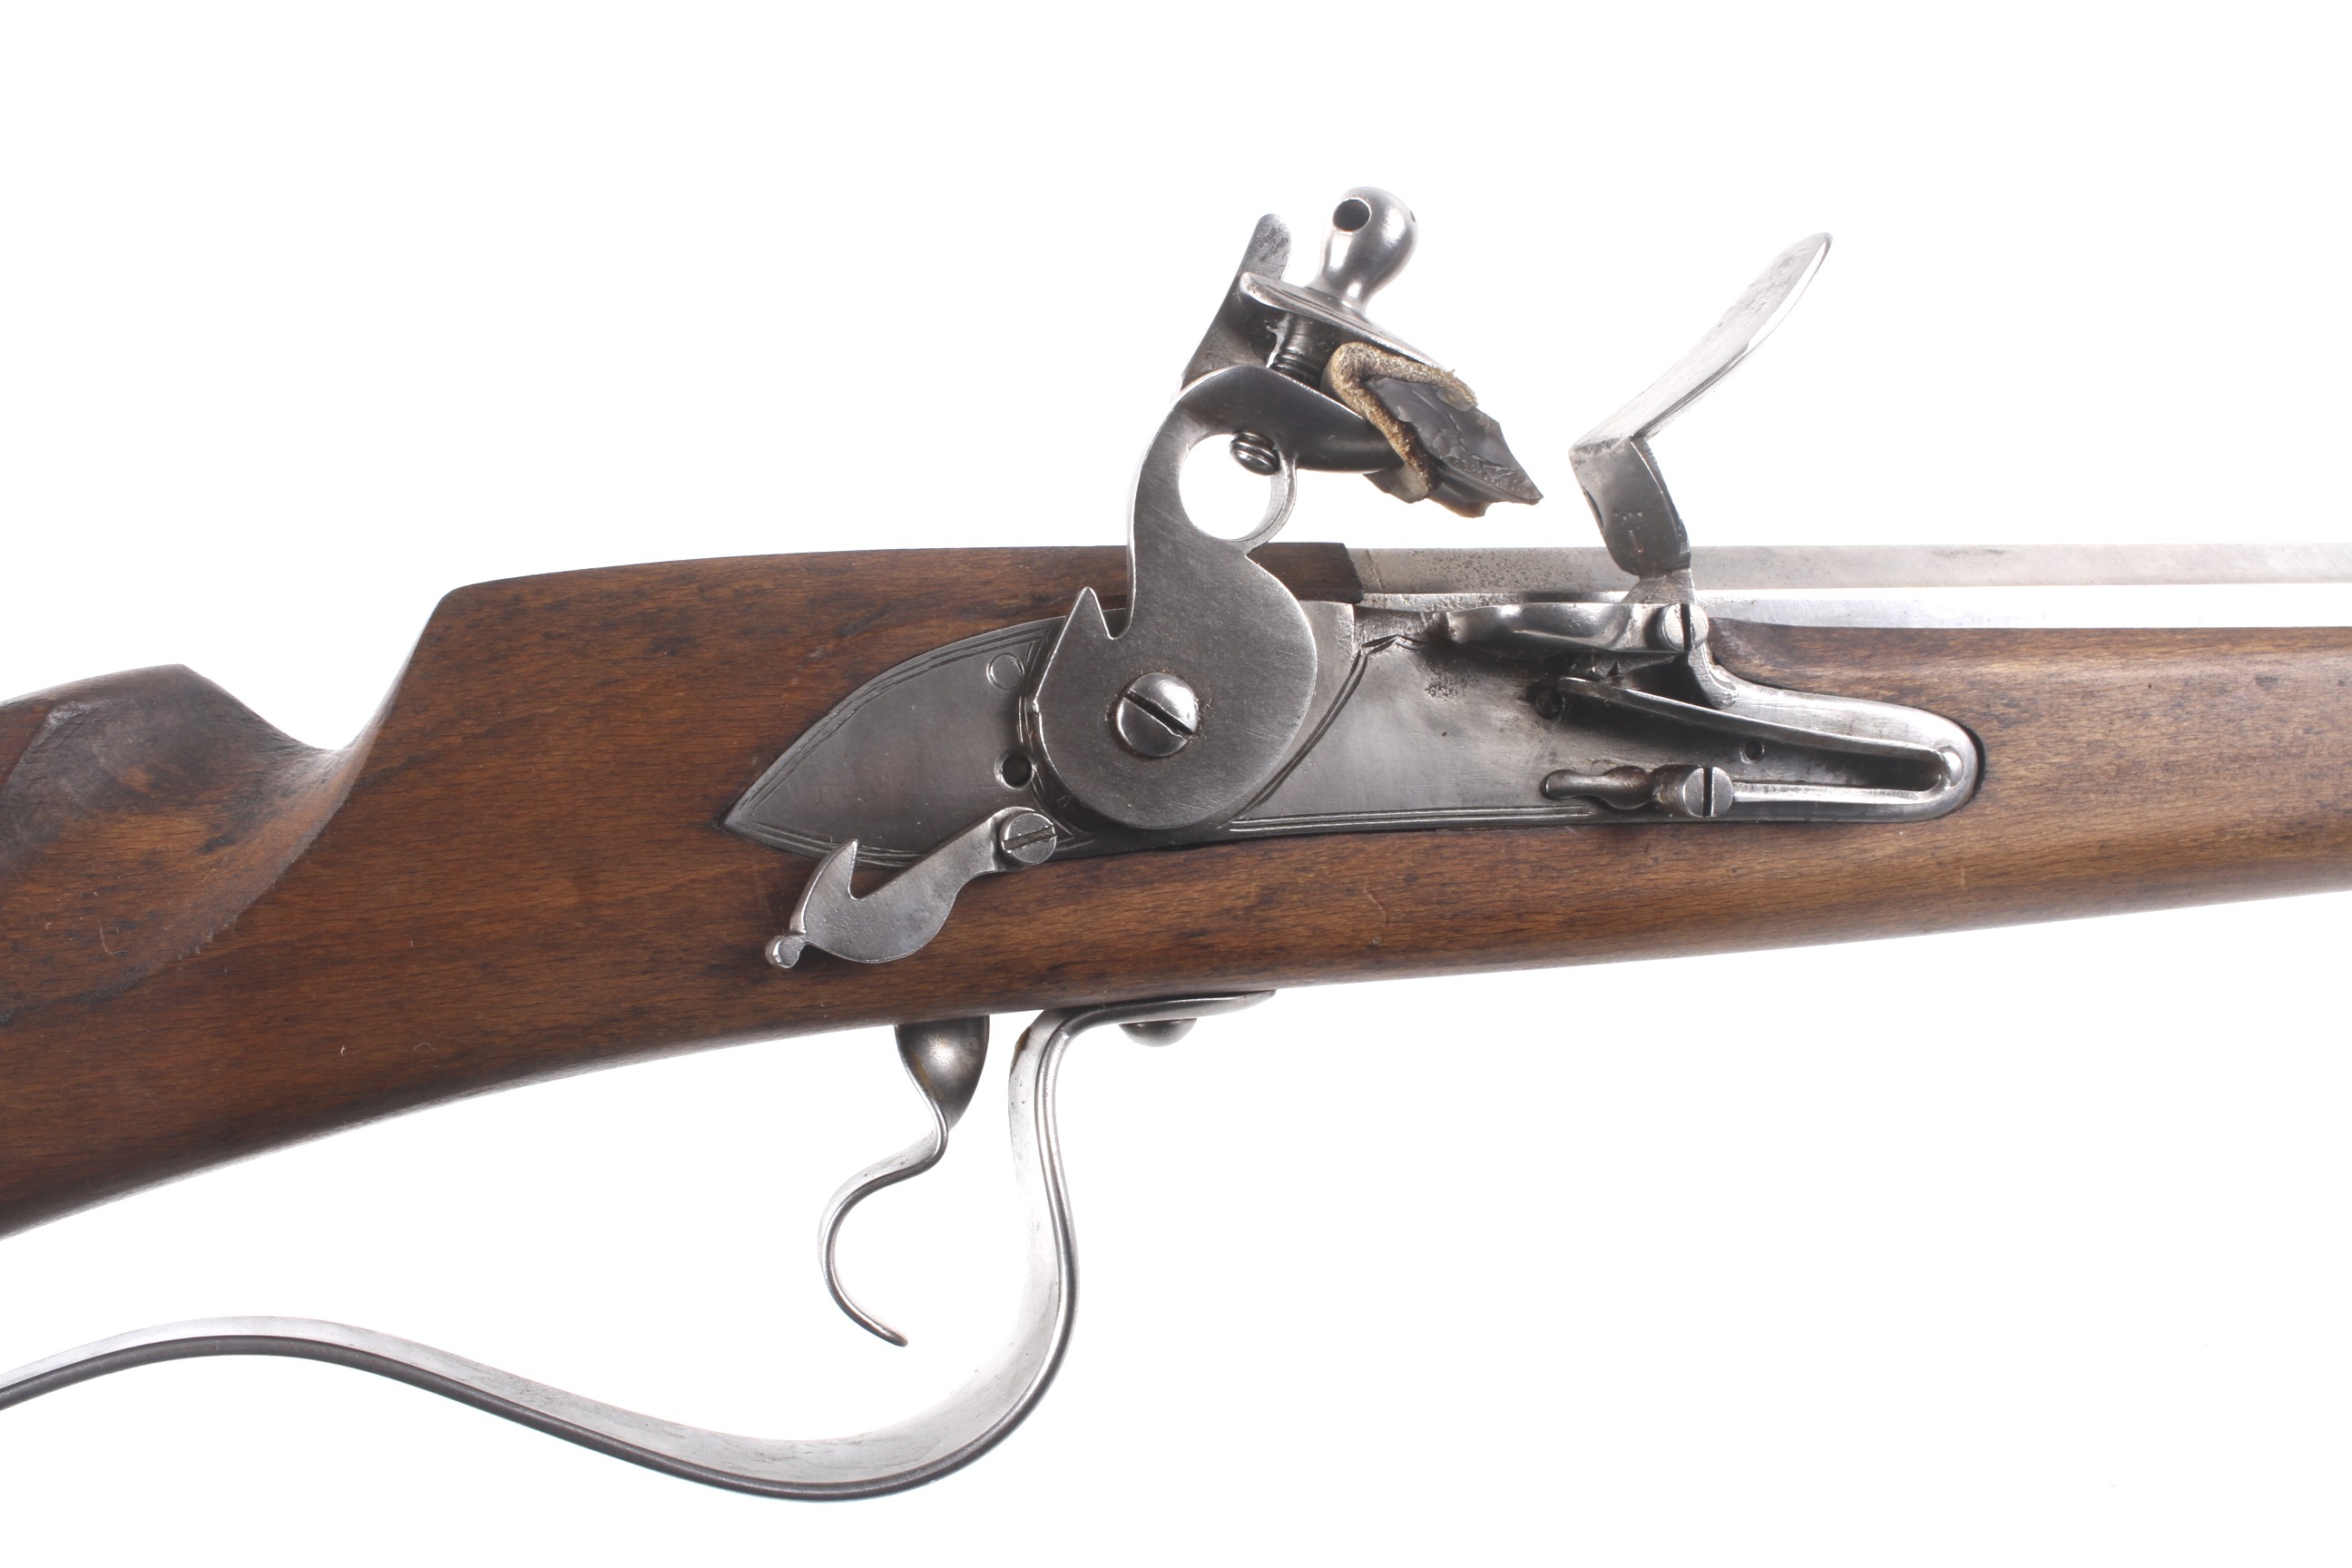 A shootable reproduction of a circa 1700 English lock muzzle loading musket. - Image 3 of 3